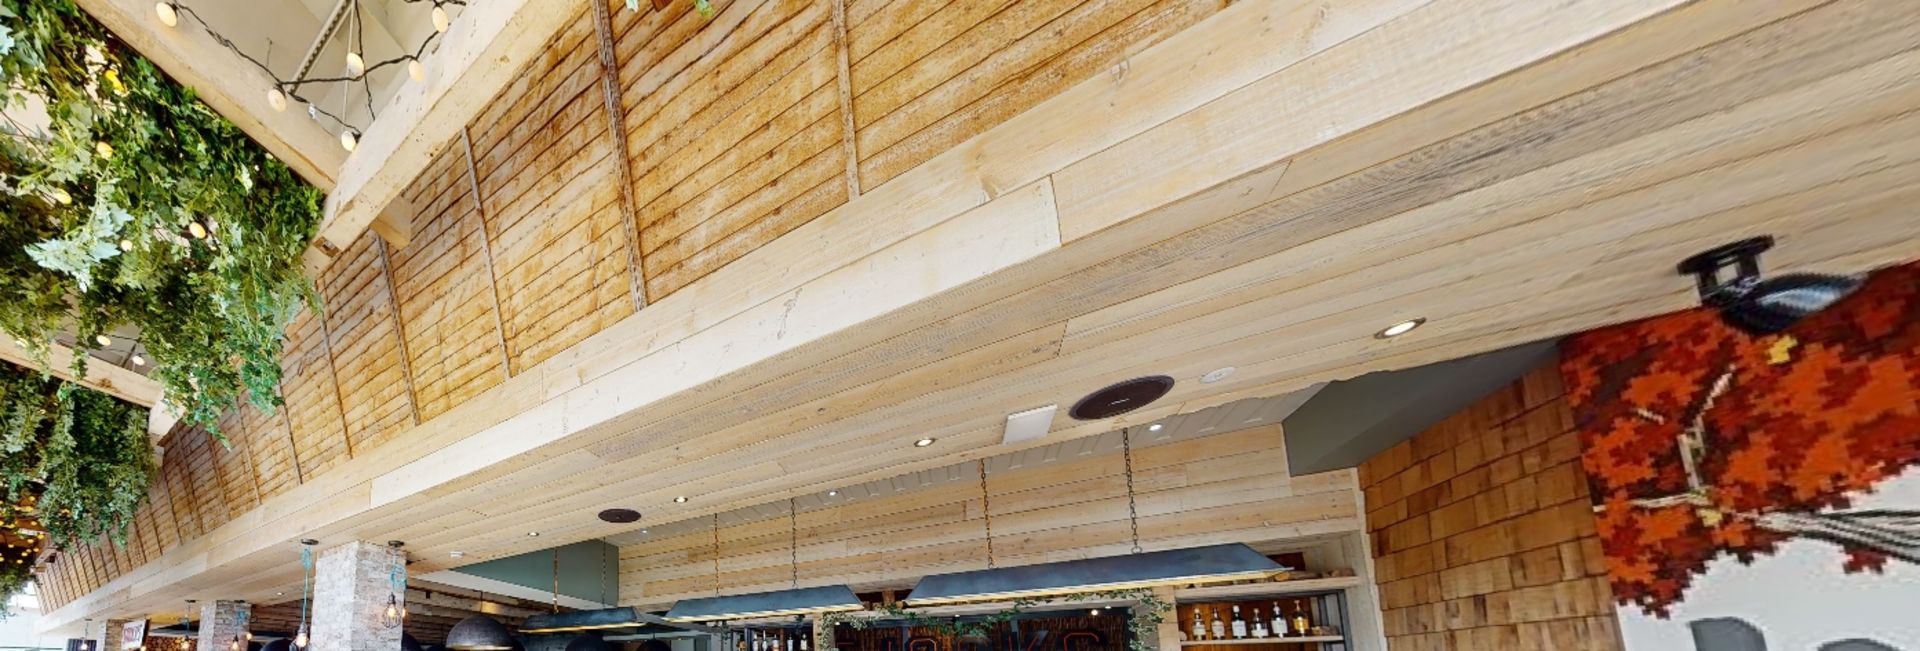 1 x Large Quantity of Natural Oak Wooden Wall Panelling - Various Sized Lengths - Image 8 of 14